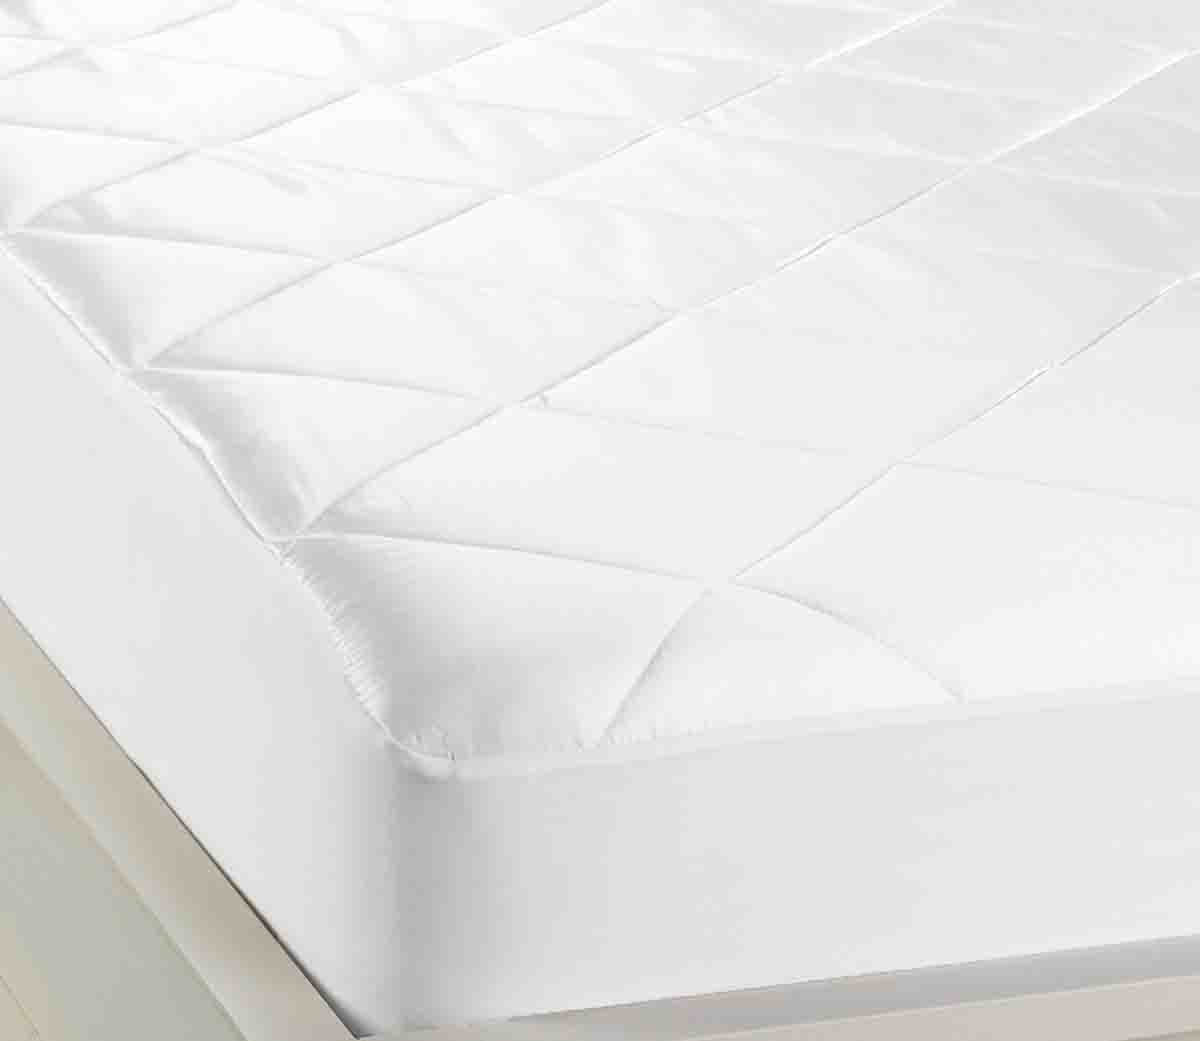 white mattress pad fitted style to protect matrresses